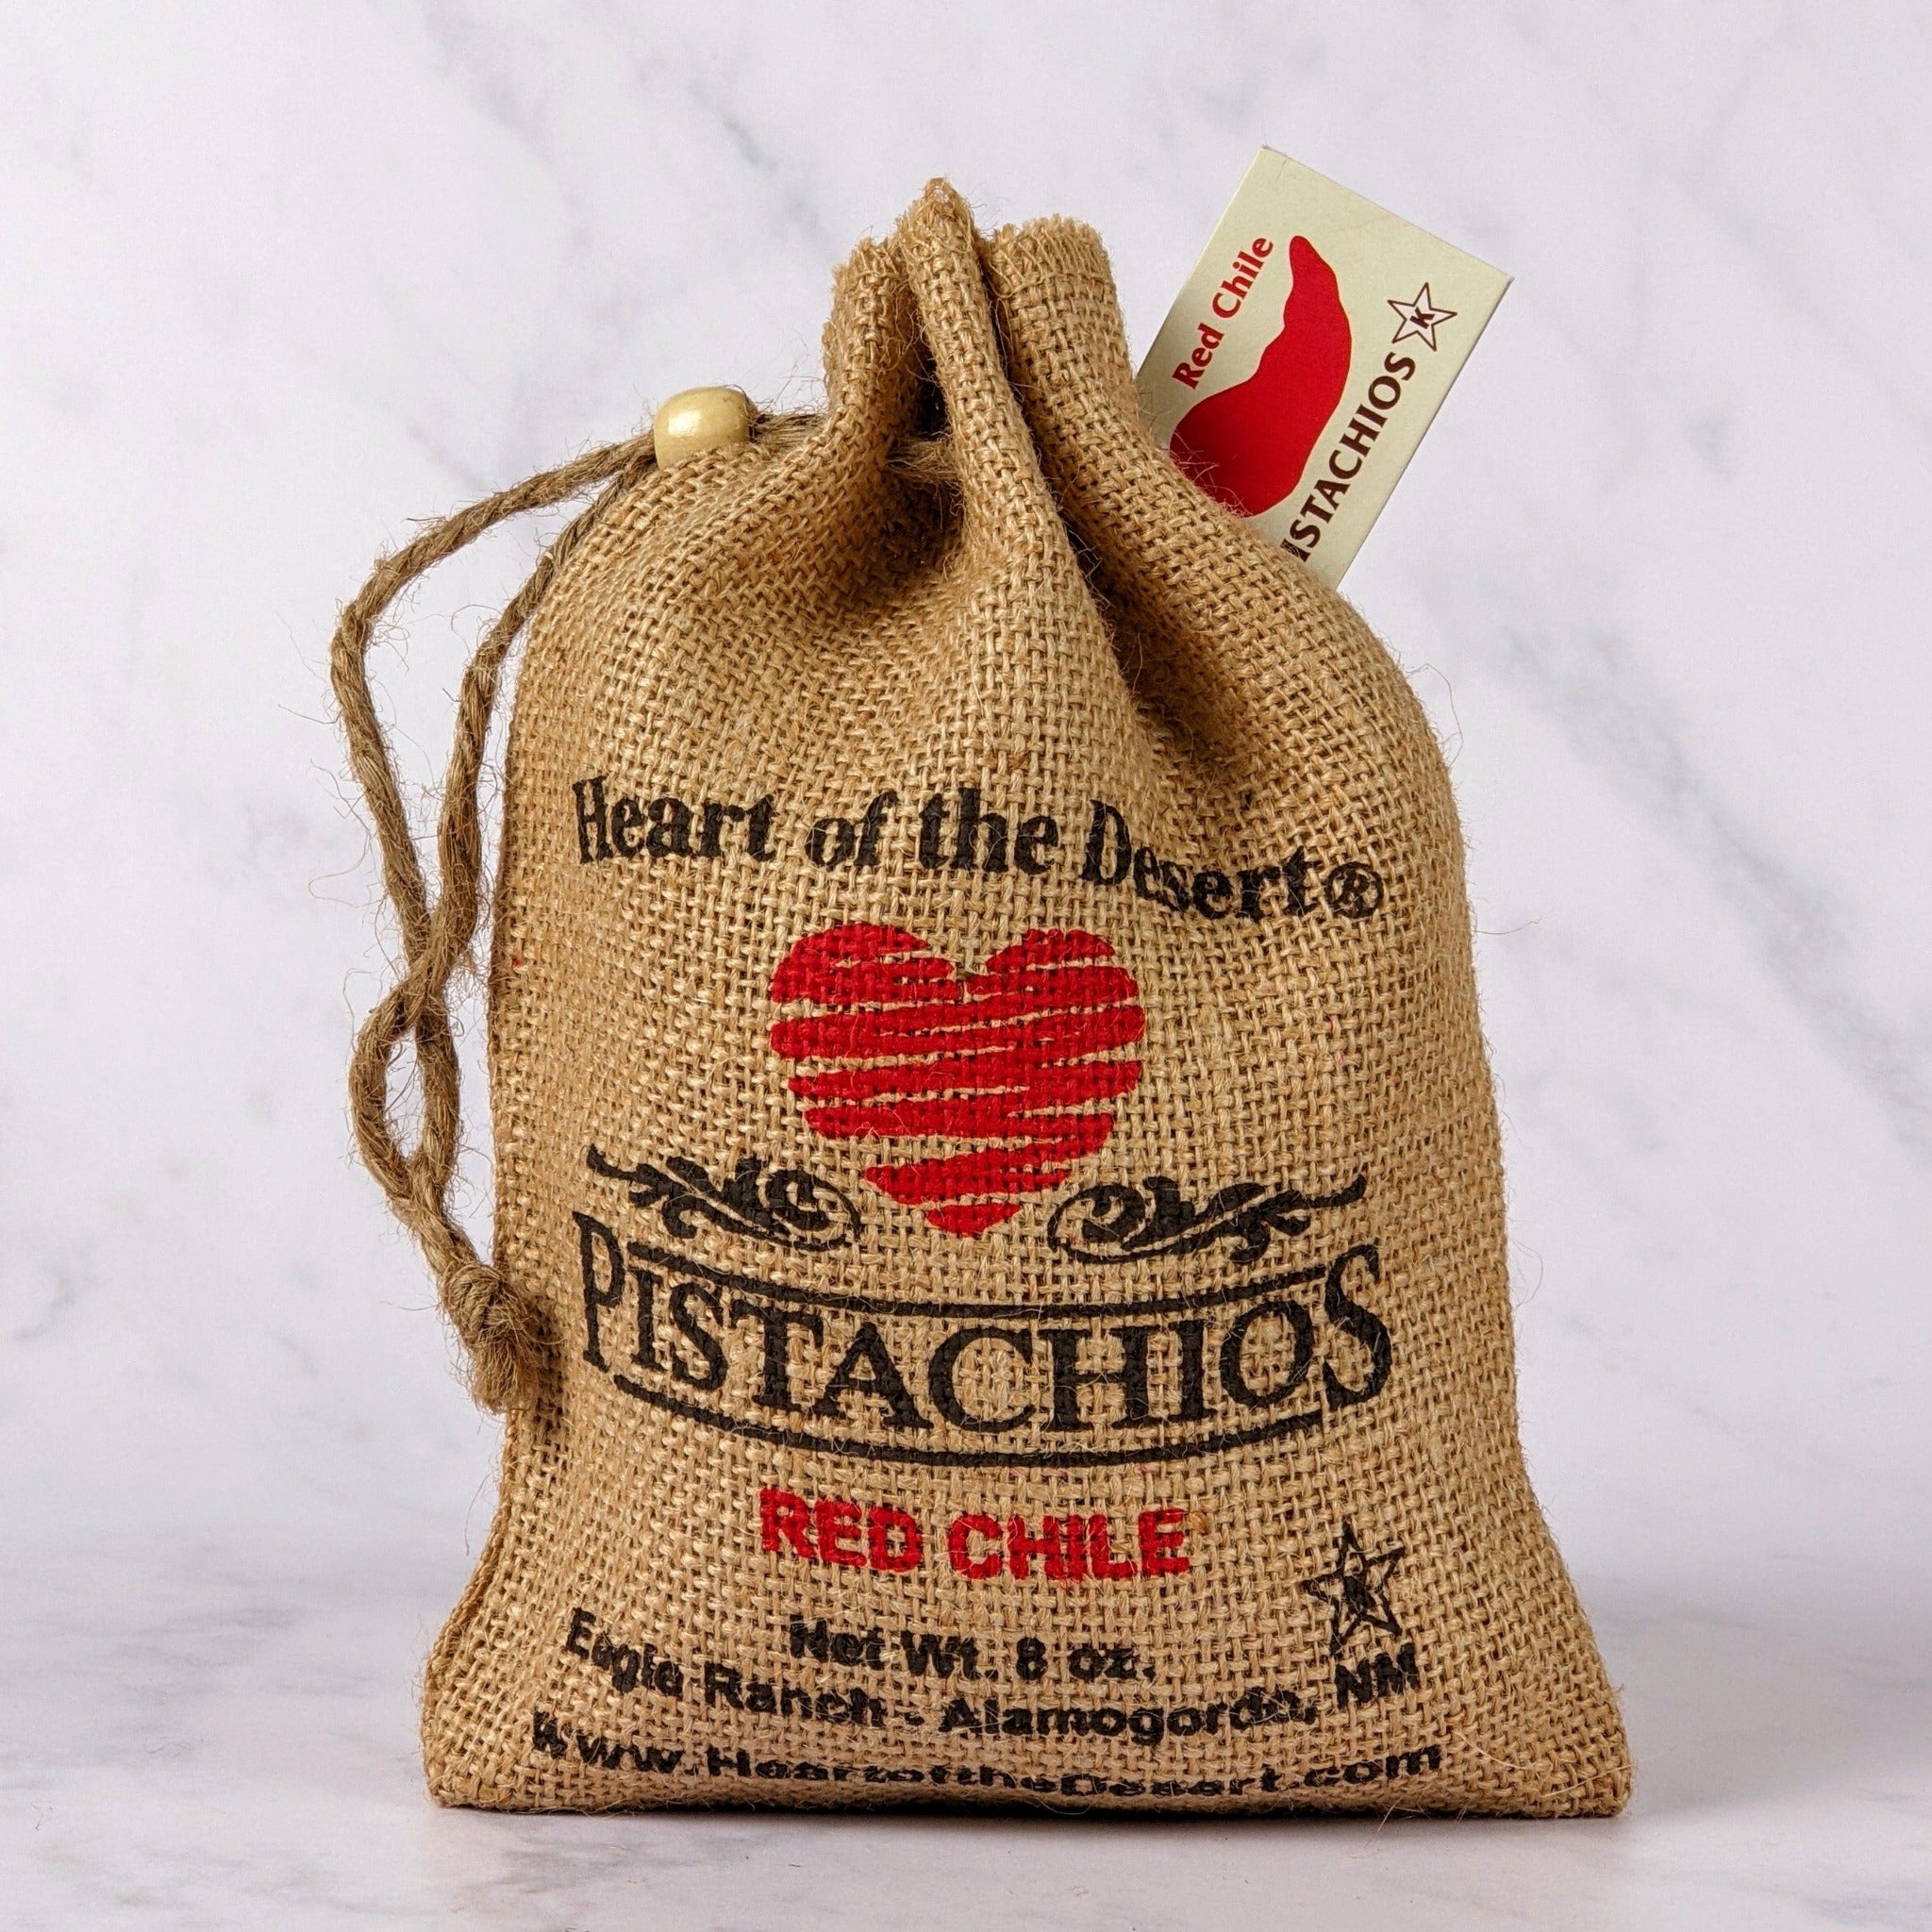 Heart of the Desert Red Chile Pistachios